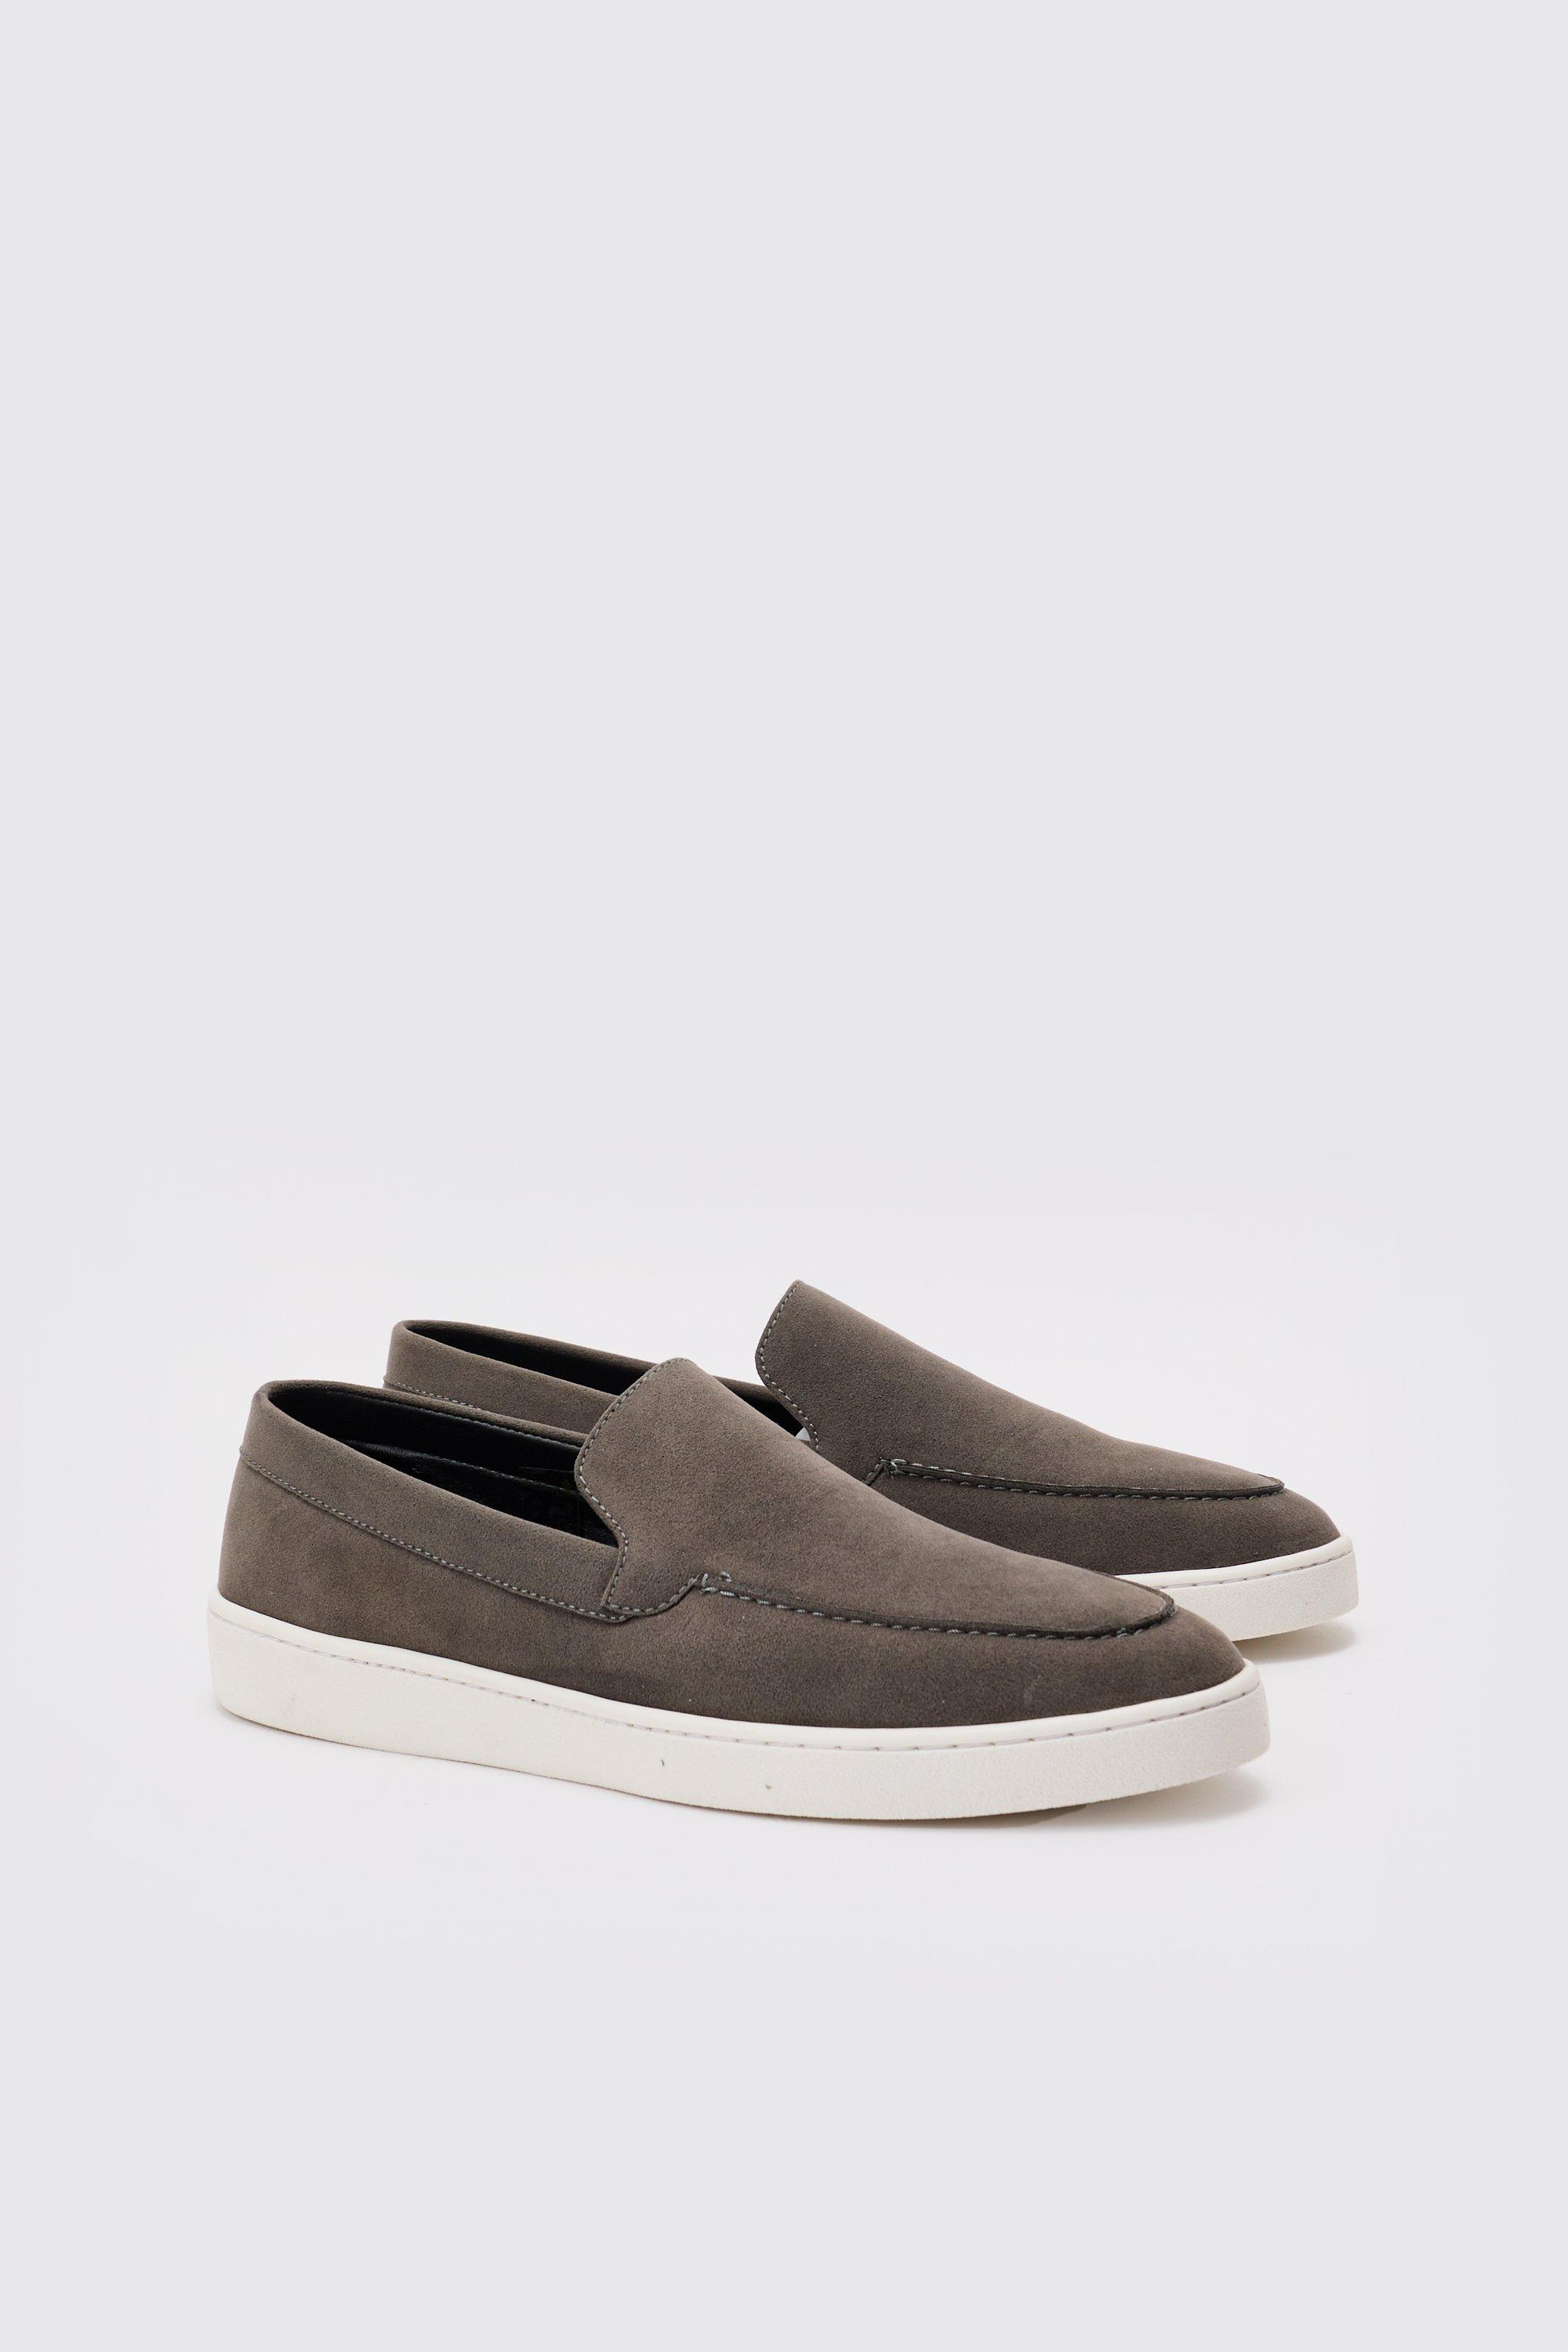 Image of Faux Suede Slip On Loafer In Grey, Grigio